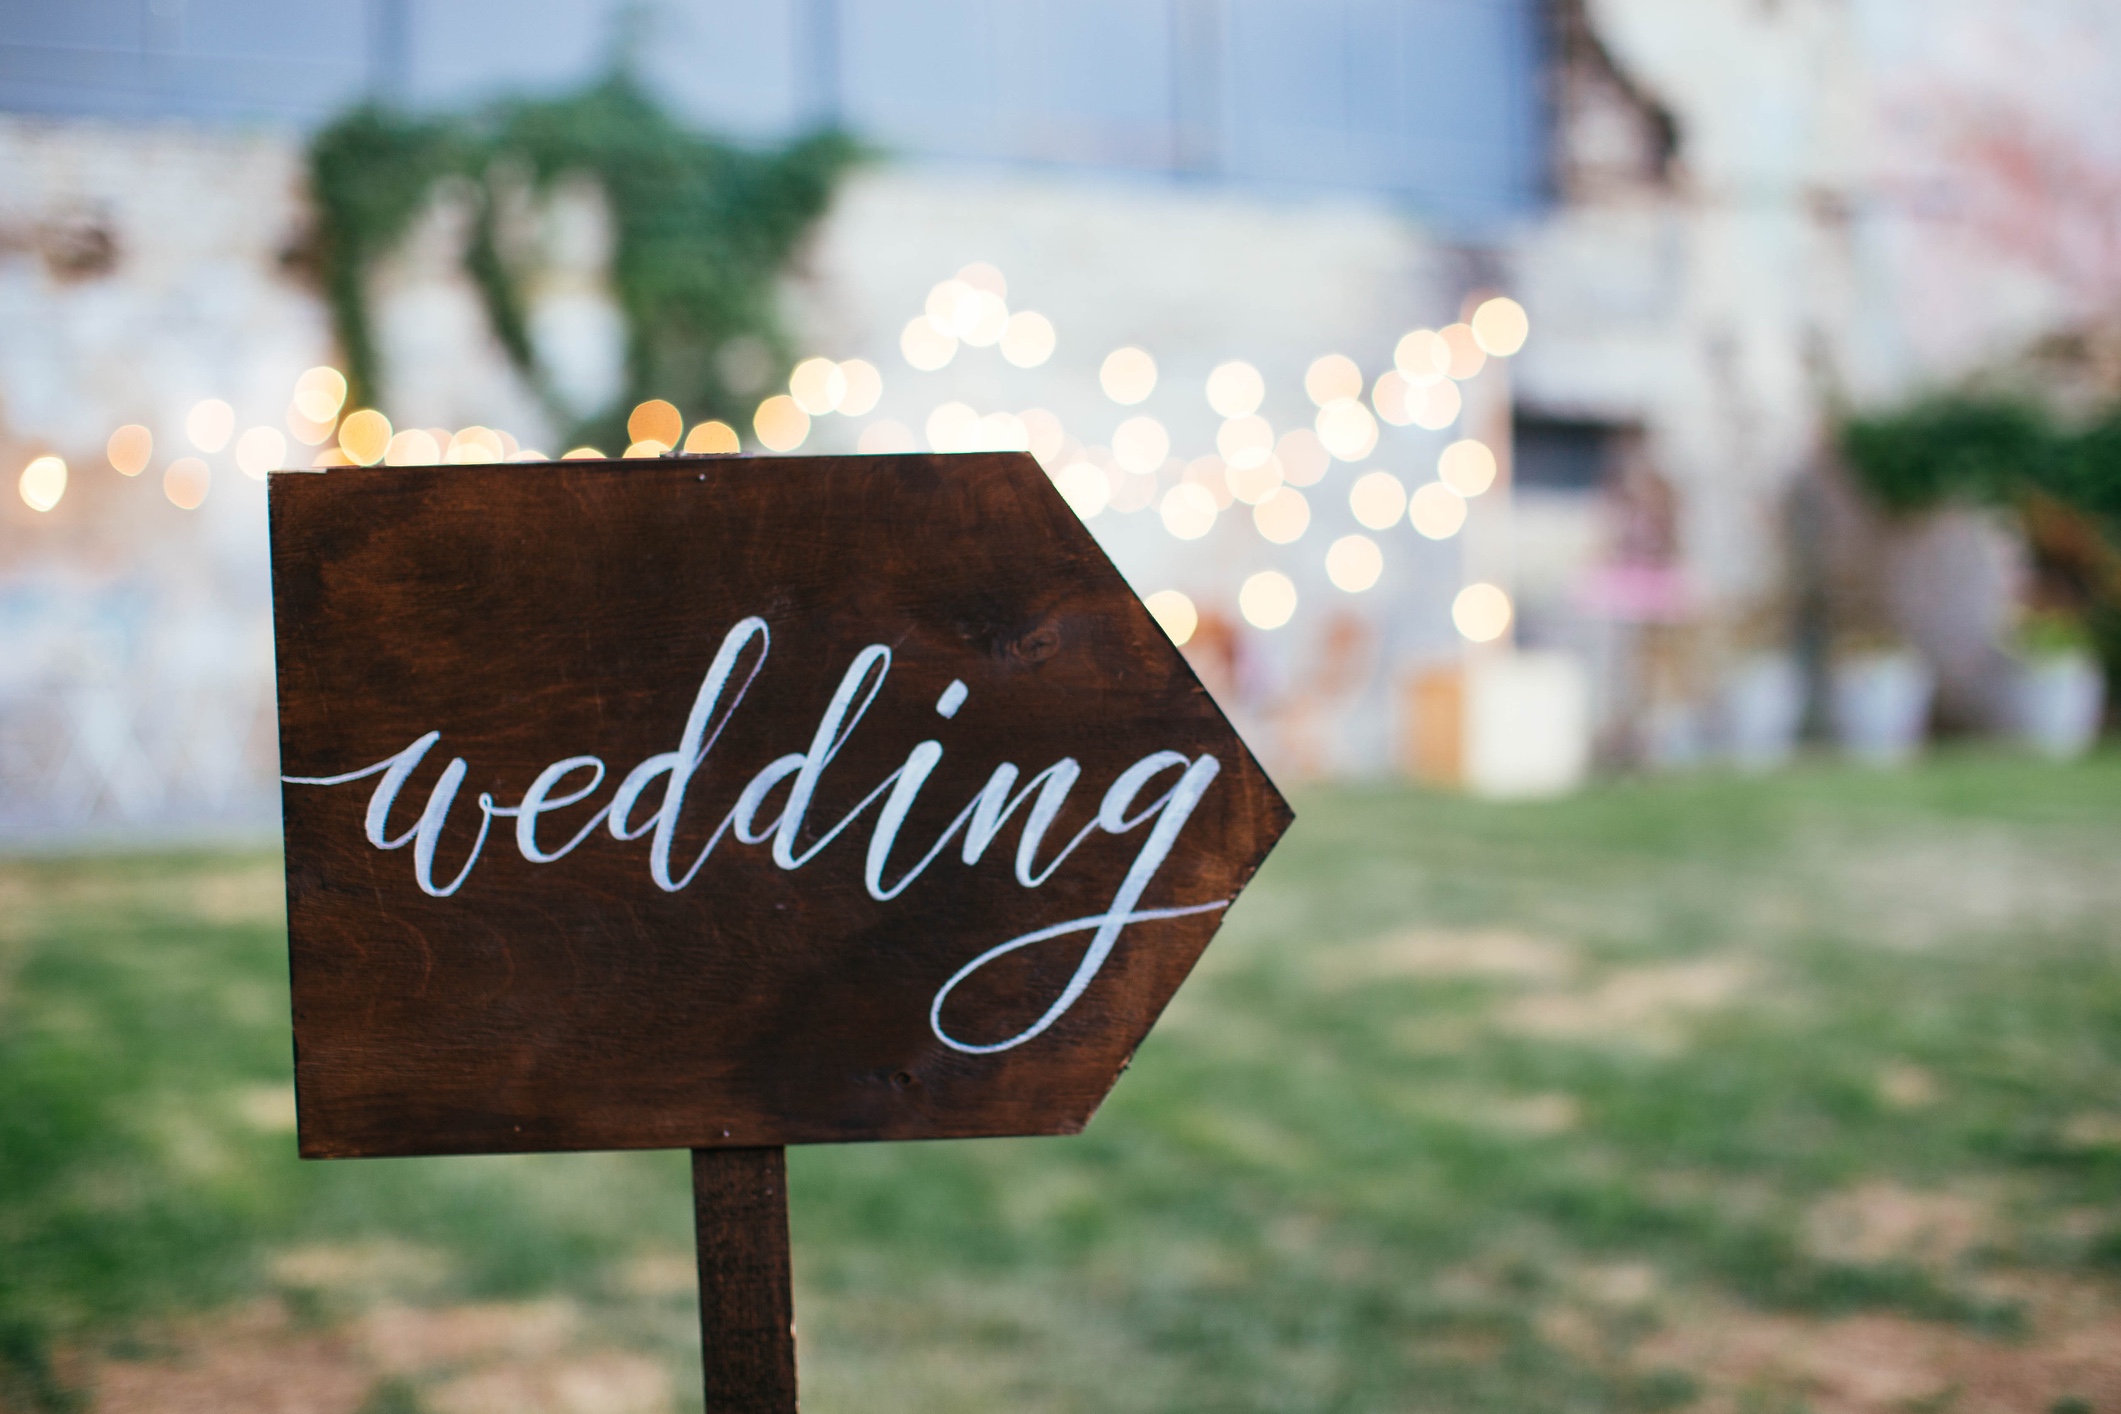 QUESTIONS TO ASK BEFORE YOU BOOK YOUR VENUE